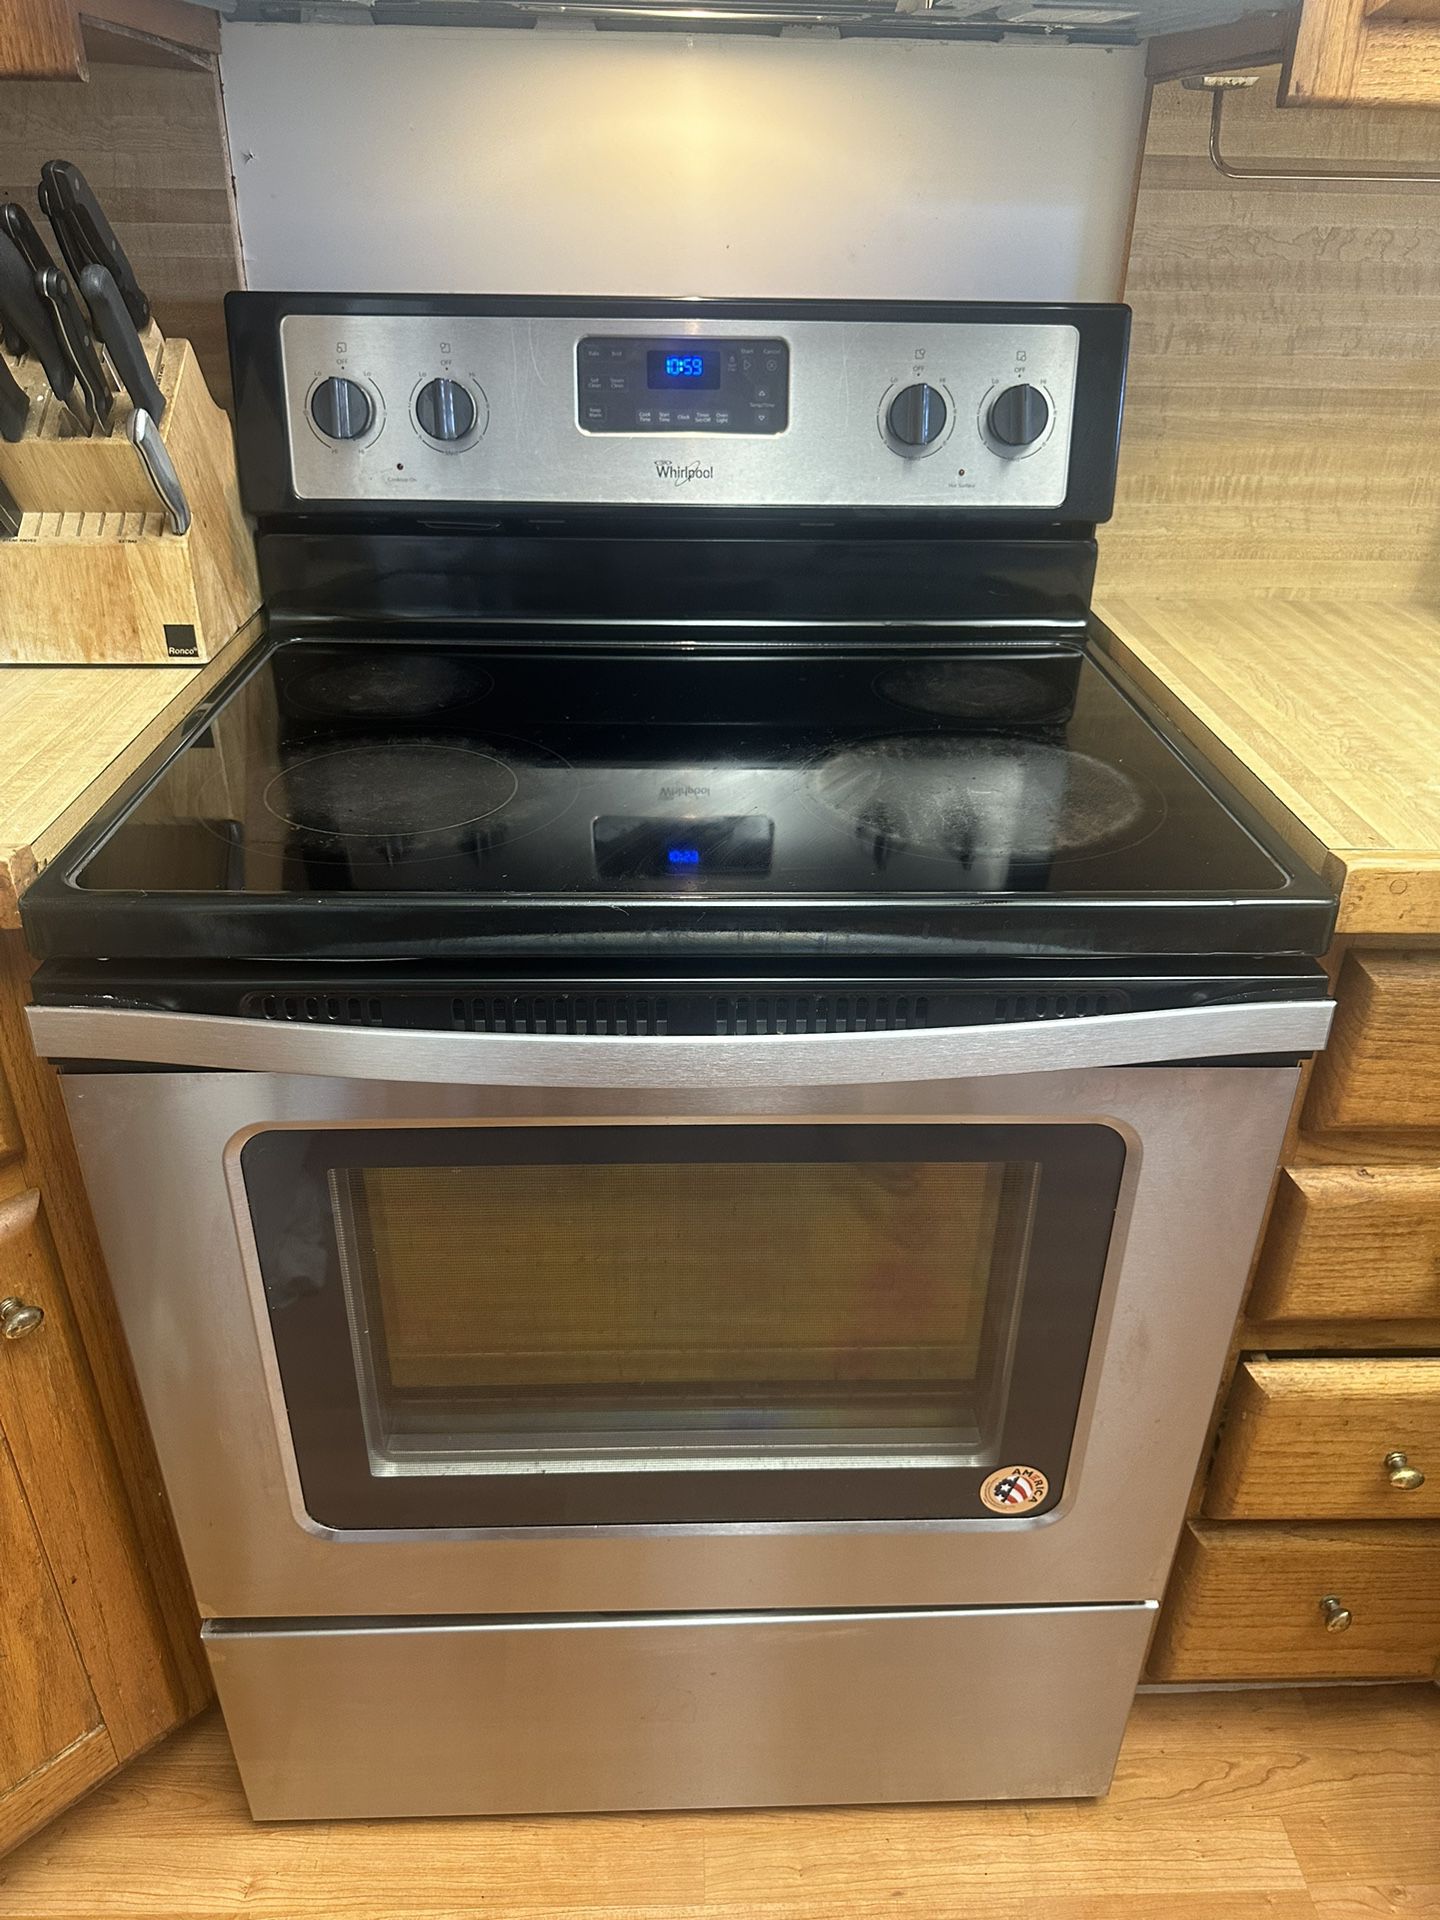 Stove Electric Stove Oven Stainless Steel Black Whirlpool! Delivery His Available! Warranty!